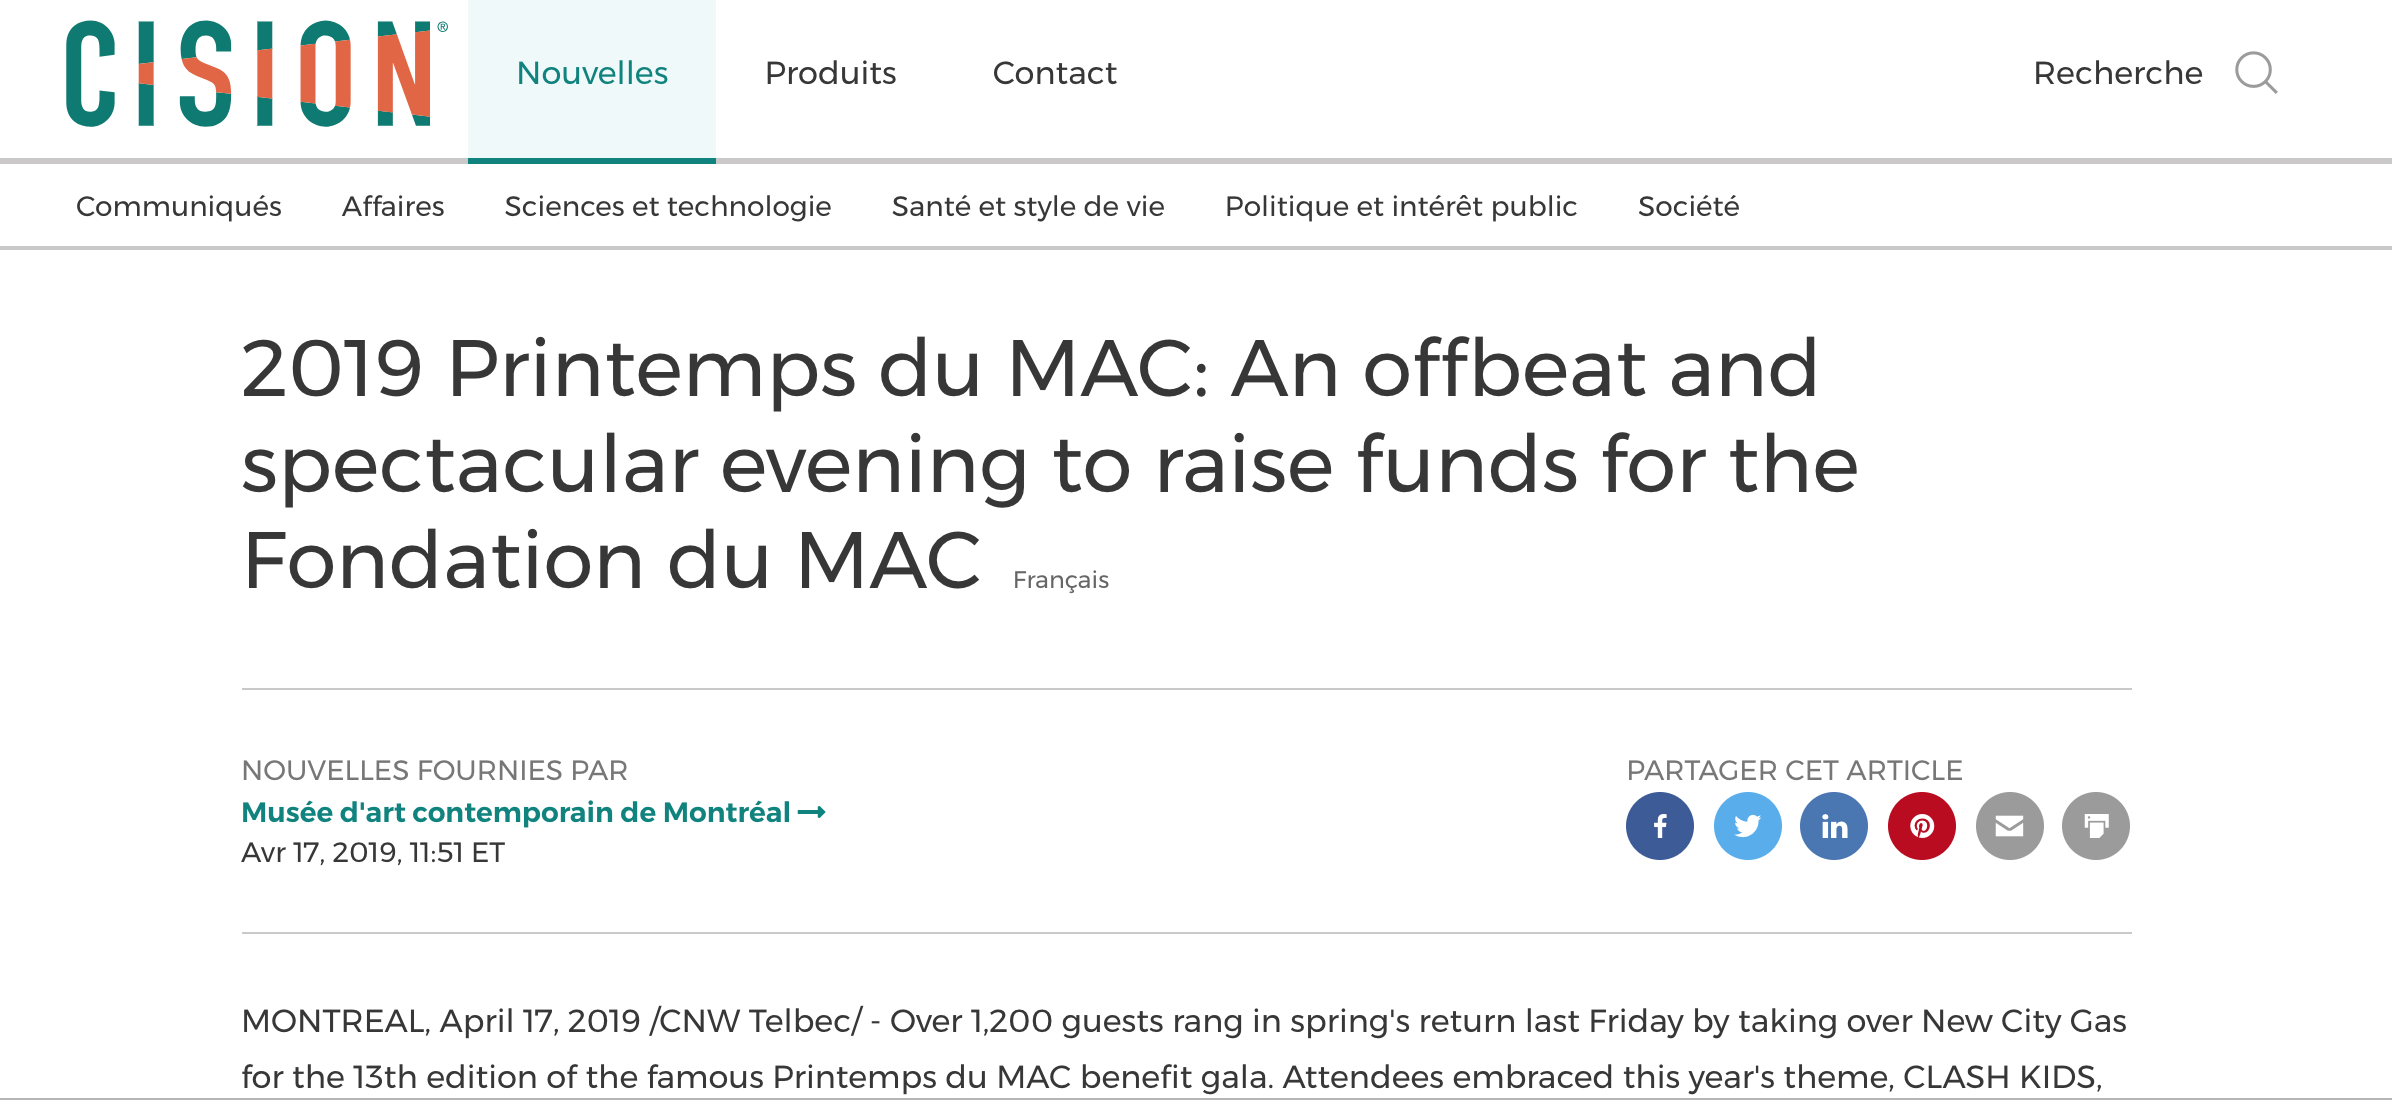  2019 Printemps du MAC: An offbeat and spectacular evening to raise funds for the Fondation du MAC. Cision.  Newswire , 17 avril 2019. L’article complet  ici .  